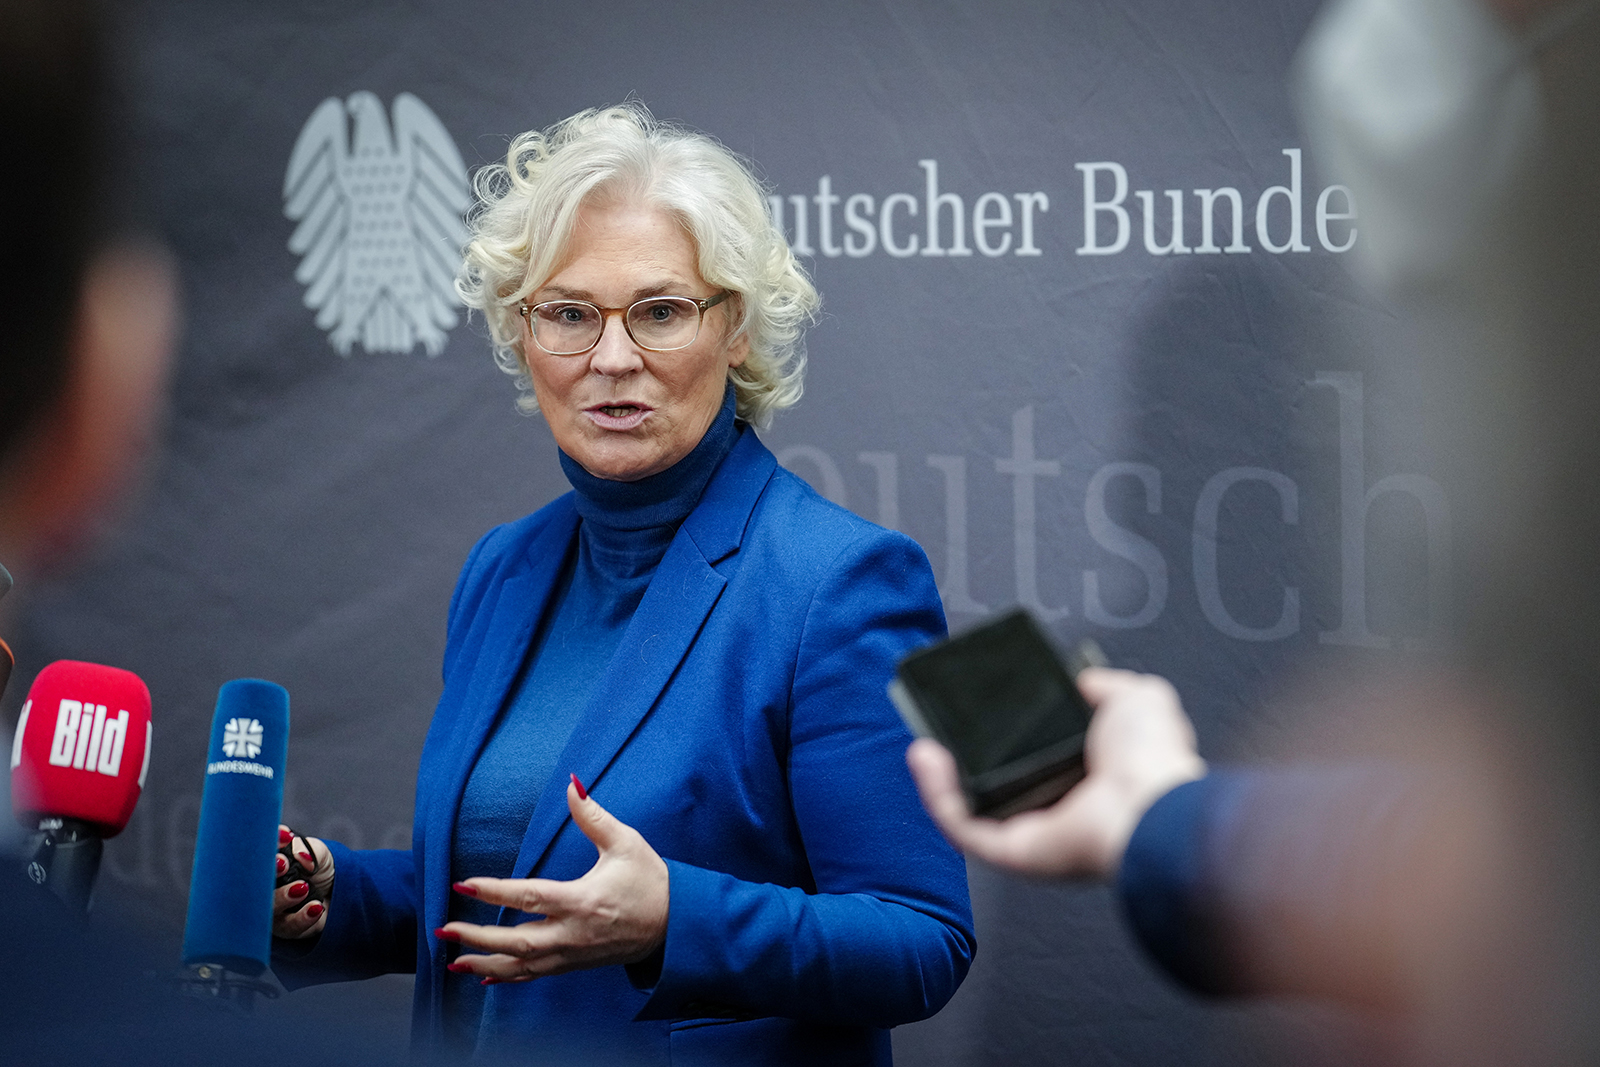 Christine Lambrecht (SPD), Federal Minister of Defense, speaks to media representatives after the special session of the Defense Committee in the Bundestag, Berlin, Germany on February 24.